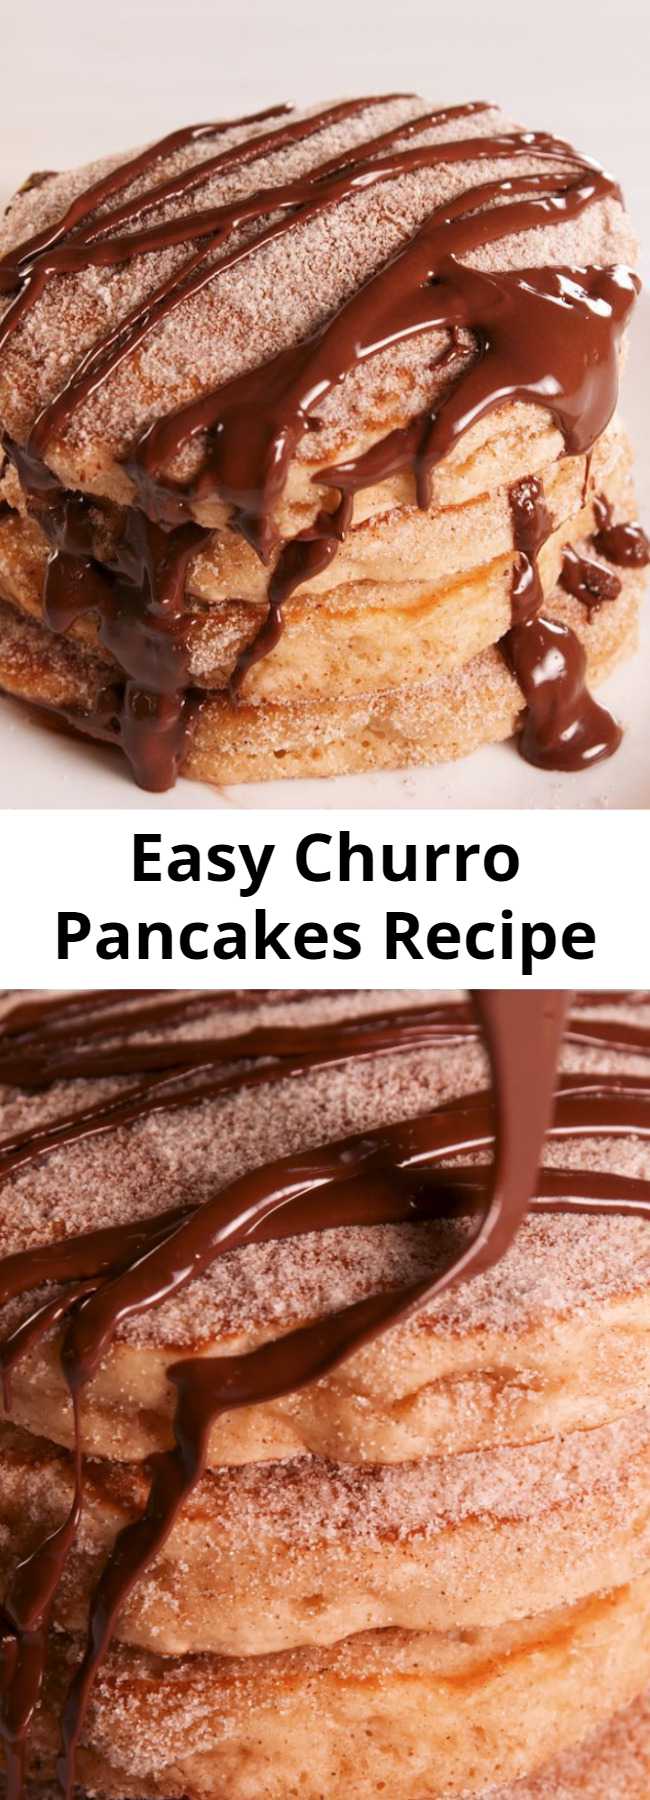 Easy Churro Pancakes Recipe - Churro pancakes are BEYOND fluffy. Cinnamon, brown sugar, and melted chocolate make these a brunch staple. #easy #recipe #churro #Pancakes #churropancakes #brownsugar #breakfast #brunch #indulgent